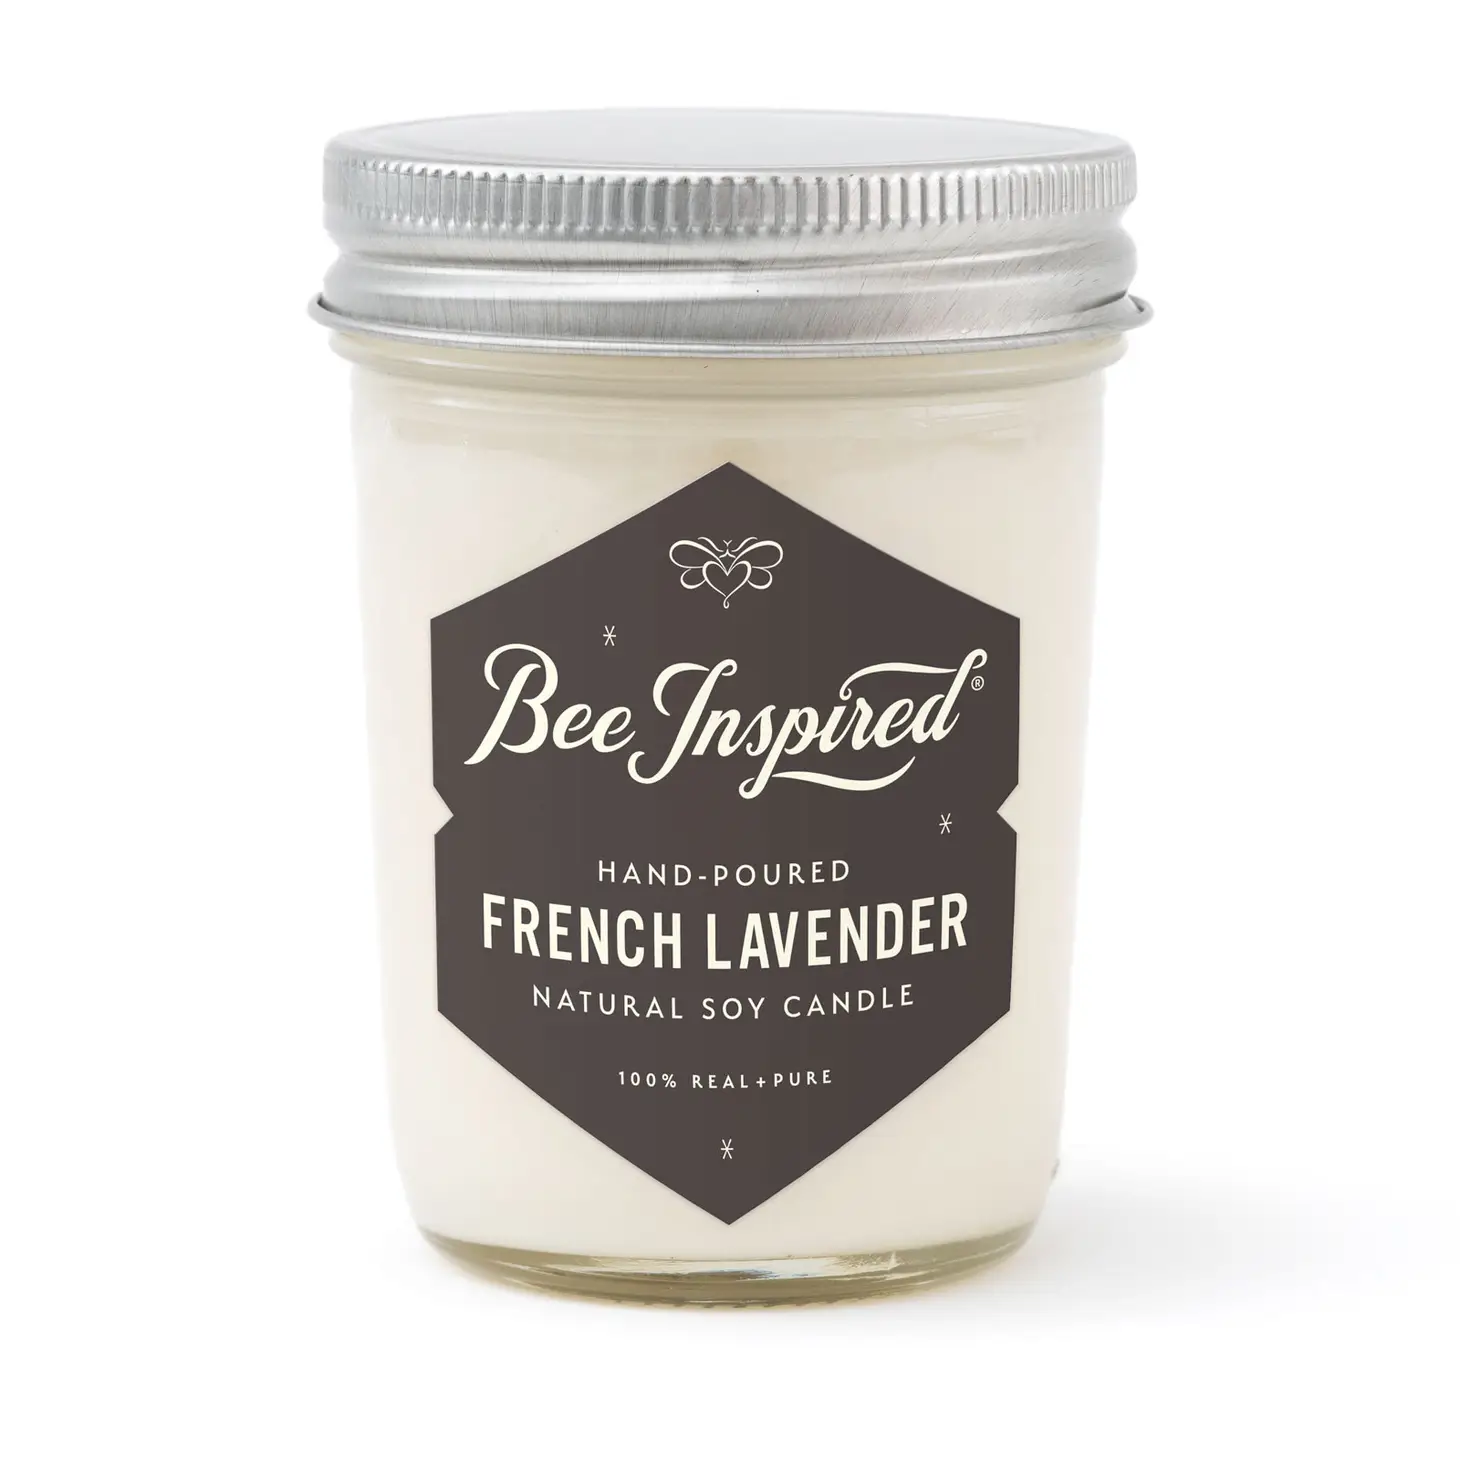 Bee Inspired French Lavender Candle in Jar